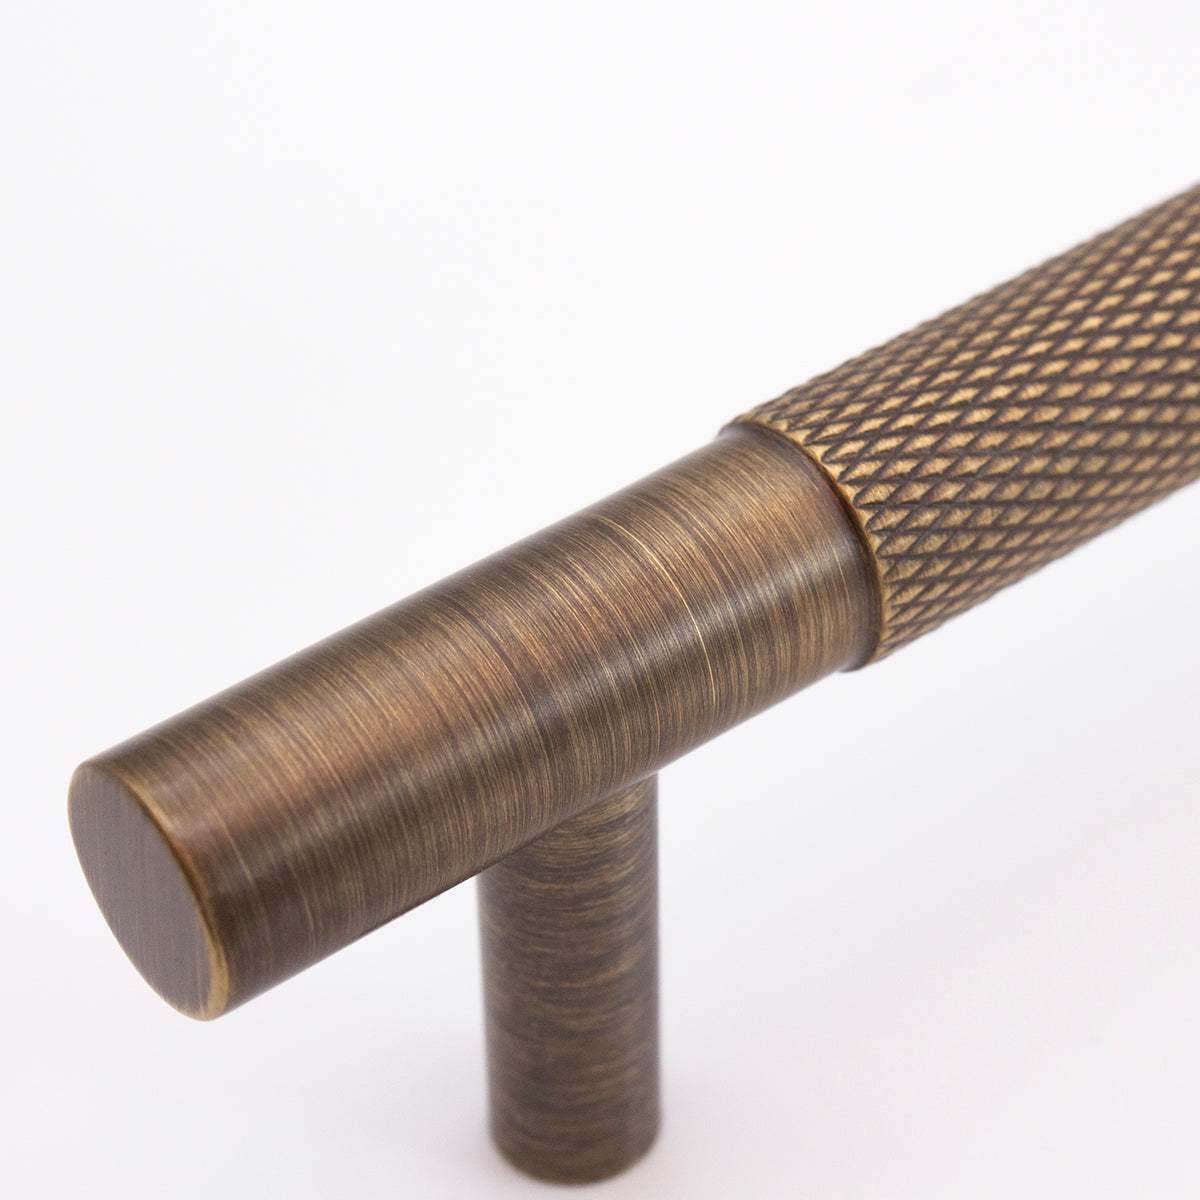 Aged Brass Knurled Drawer Pull - Charmian